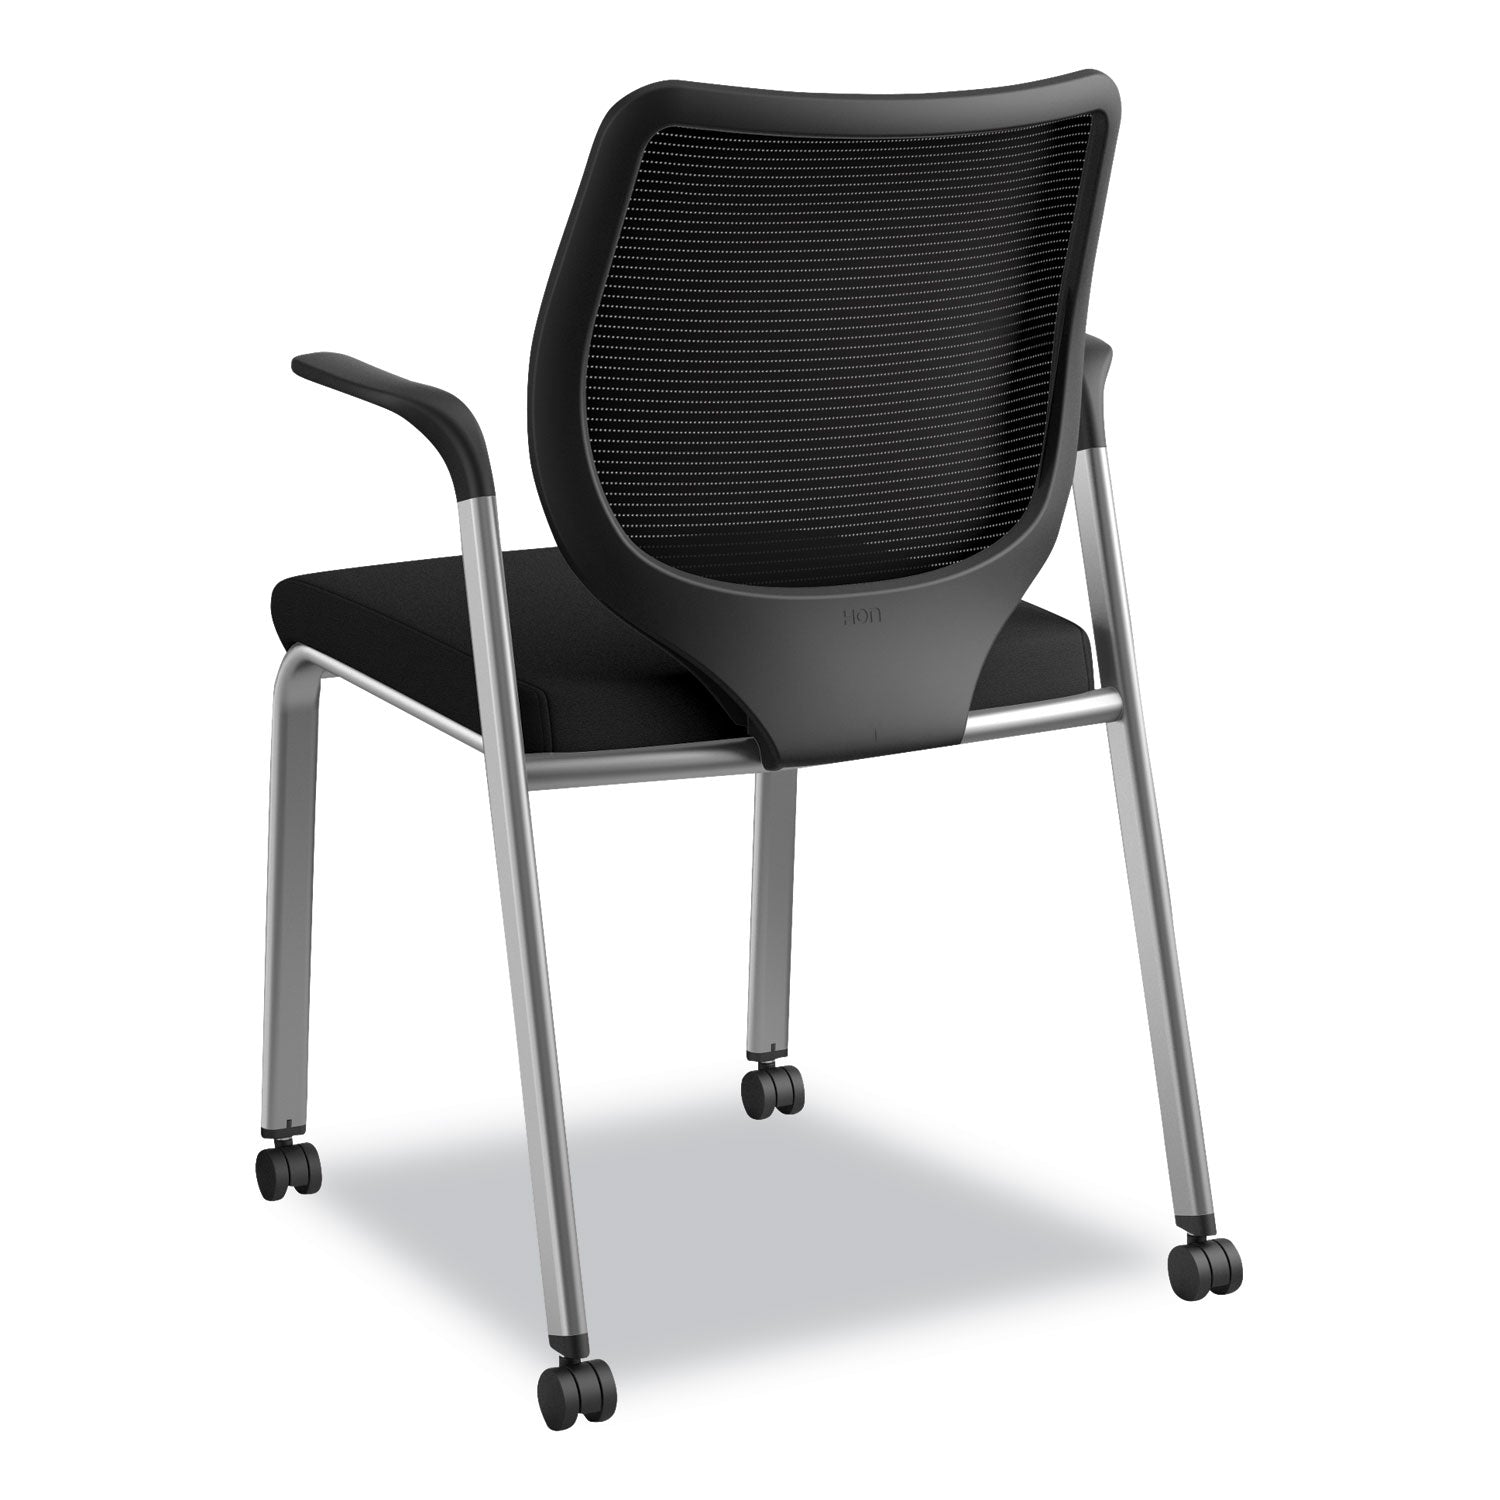 nucleus-series-multipurpose-stacking-chair-with-ilira-stretch-m4-back-supports-up-to-300-lb-black-seat-back-platinum-base_honn606hcu10t1 - 8